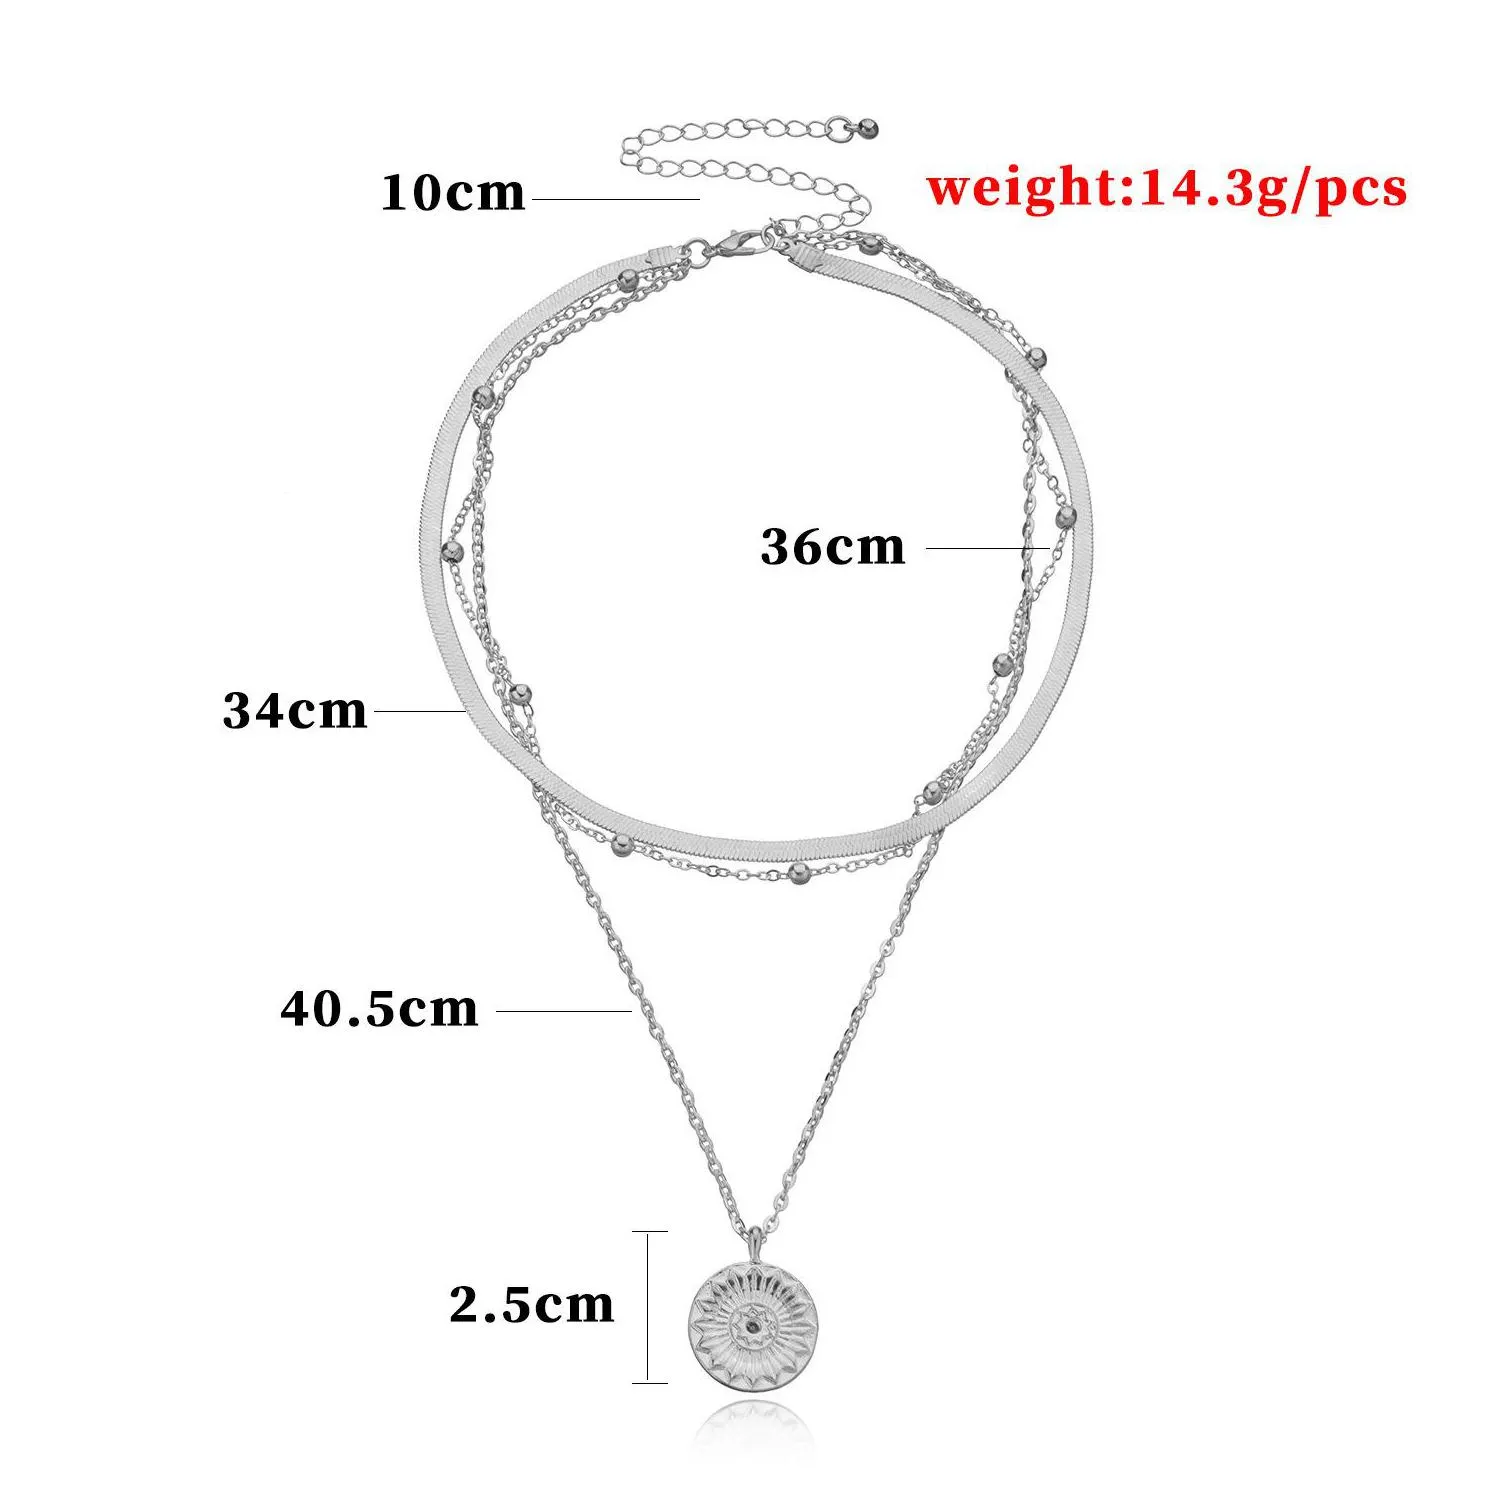 Pendant Necklaces Sier Gold Chains Mtilayer Choker Necklace Pendant Necklaces Wrap Women Fashion Jewelry Will And Sandy Gift Jewelry N Dhlsw